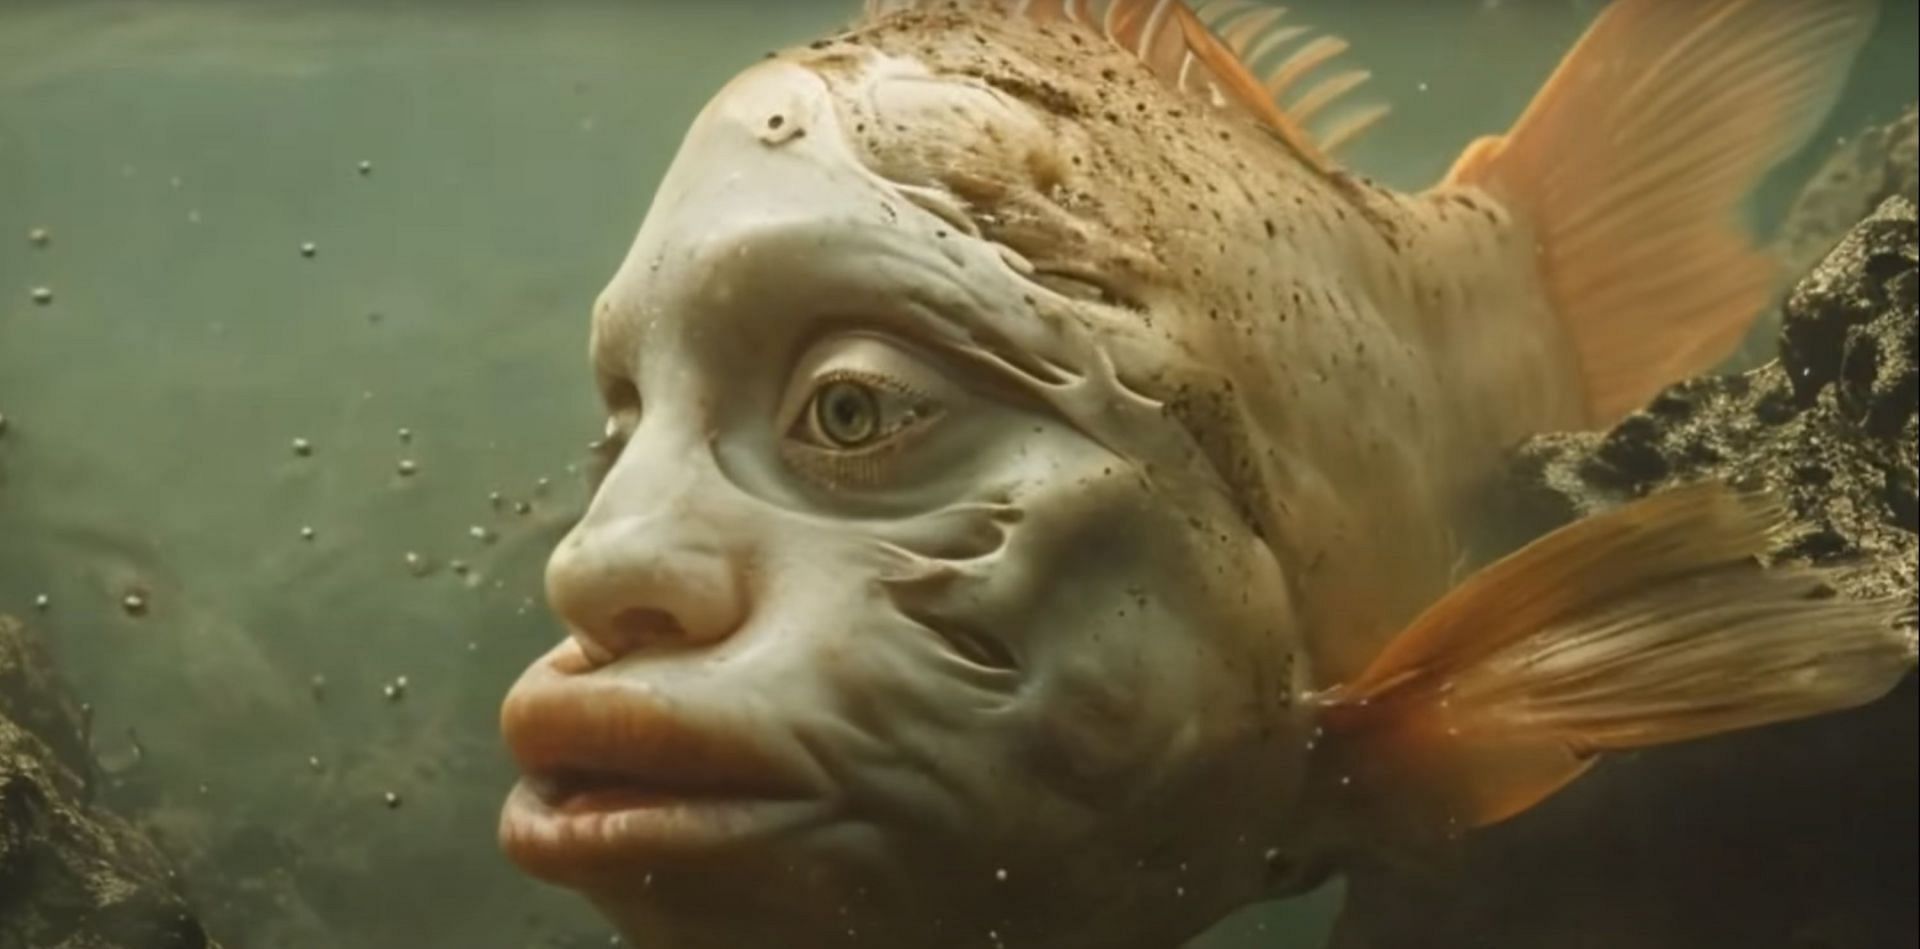 Claims of the existence of human-faced fishes debunked (Image via  Headtap Videos/YouTube)